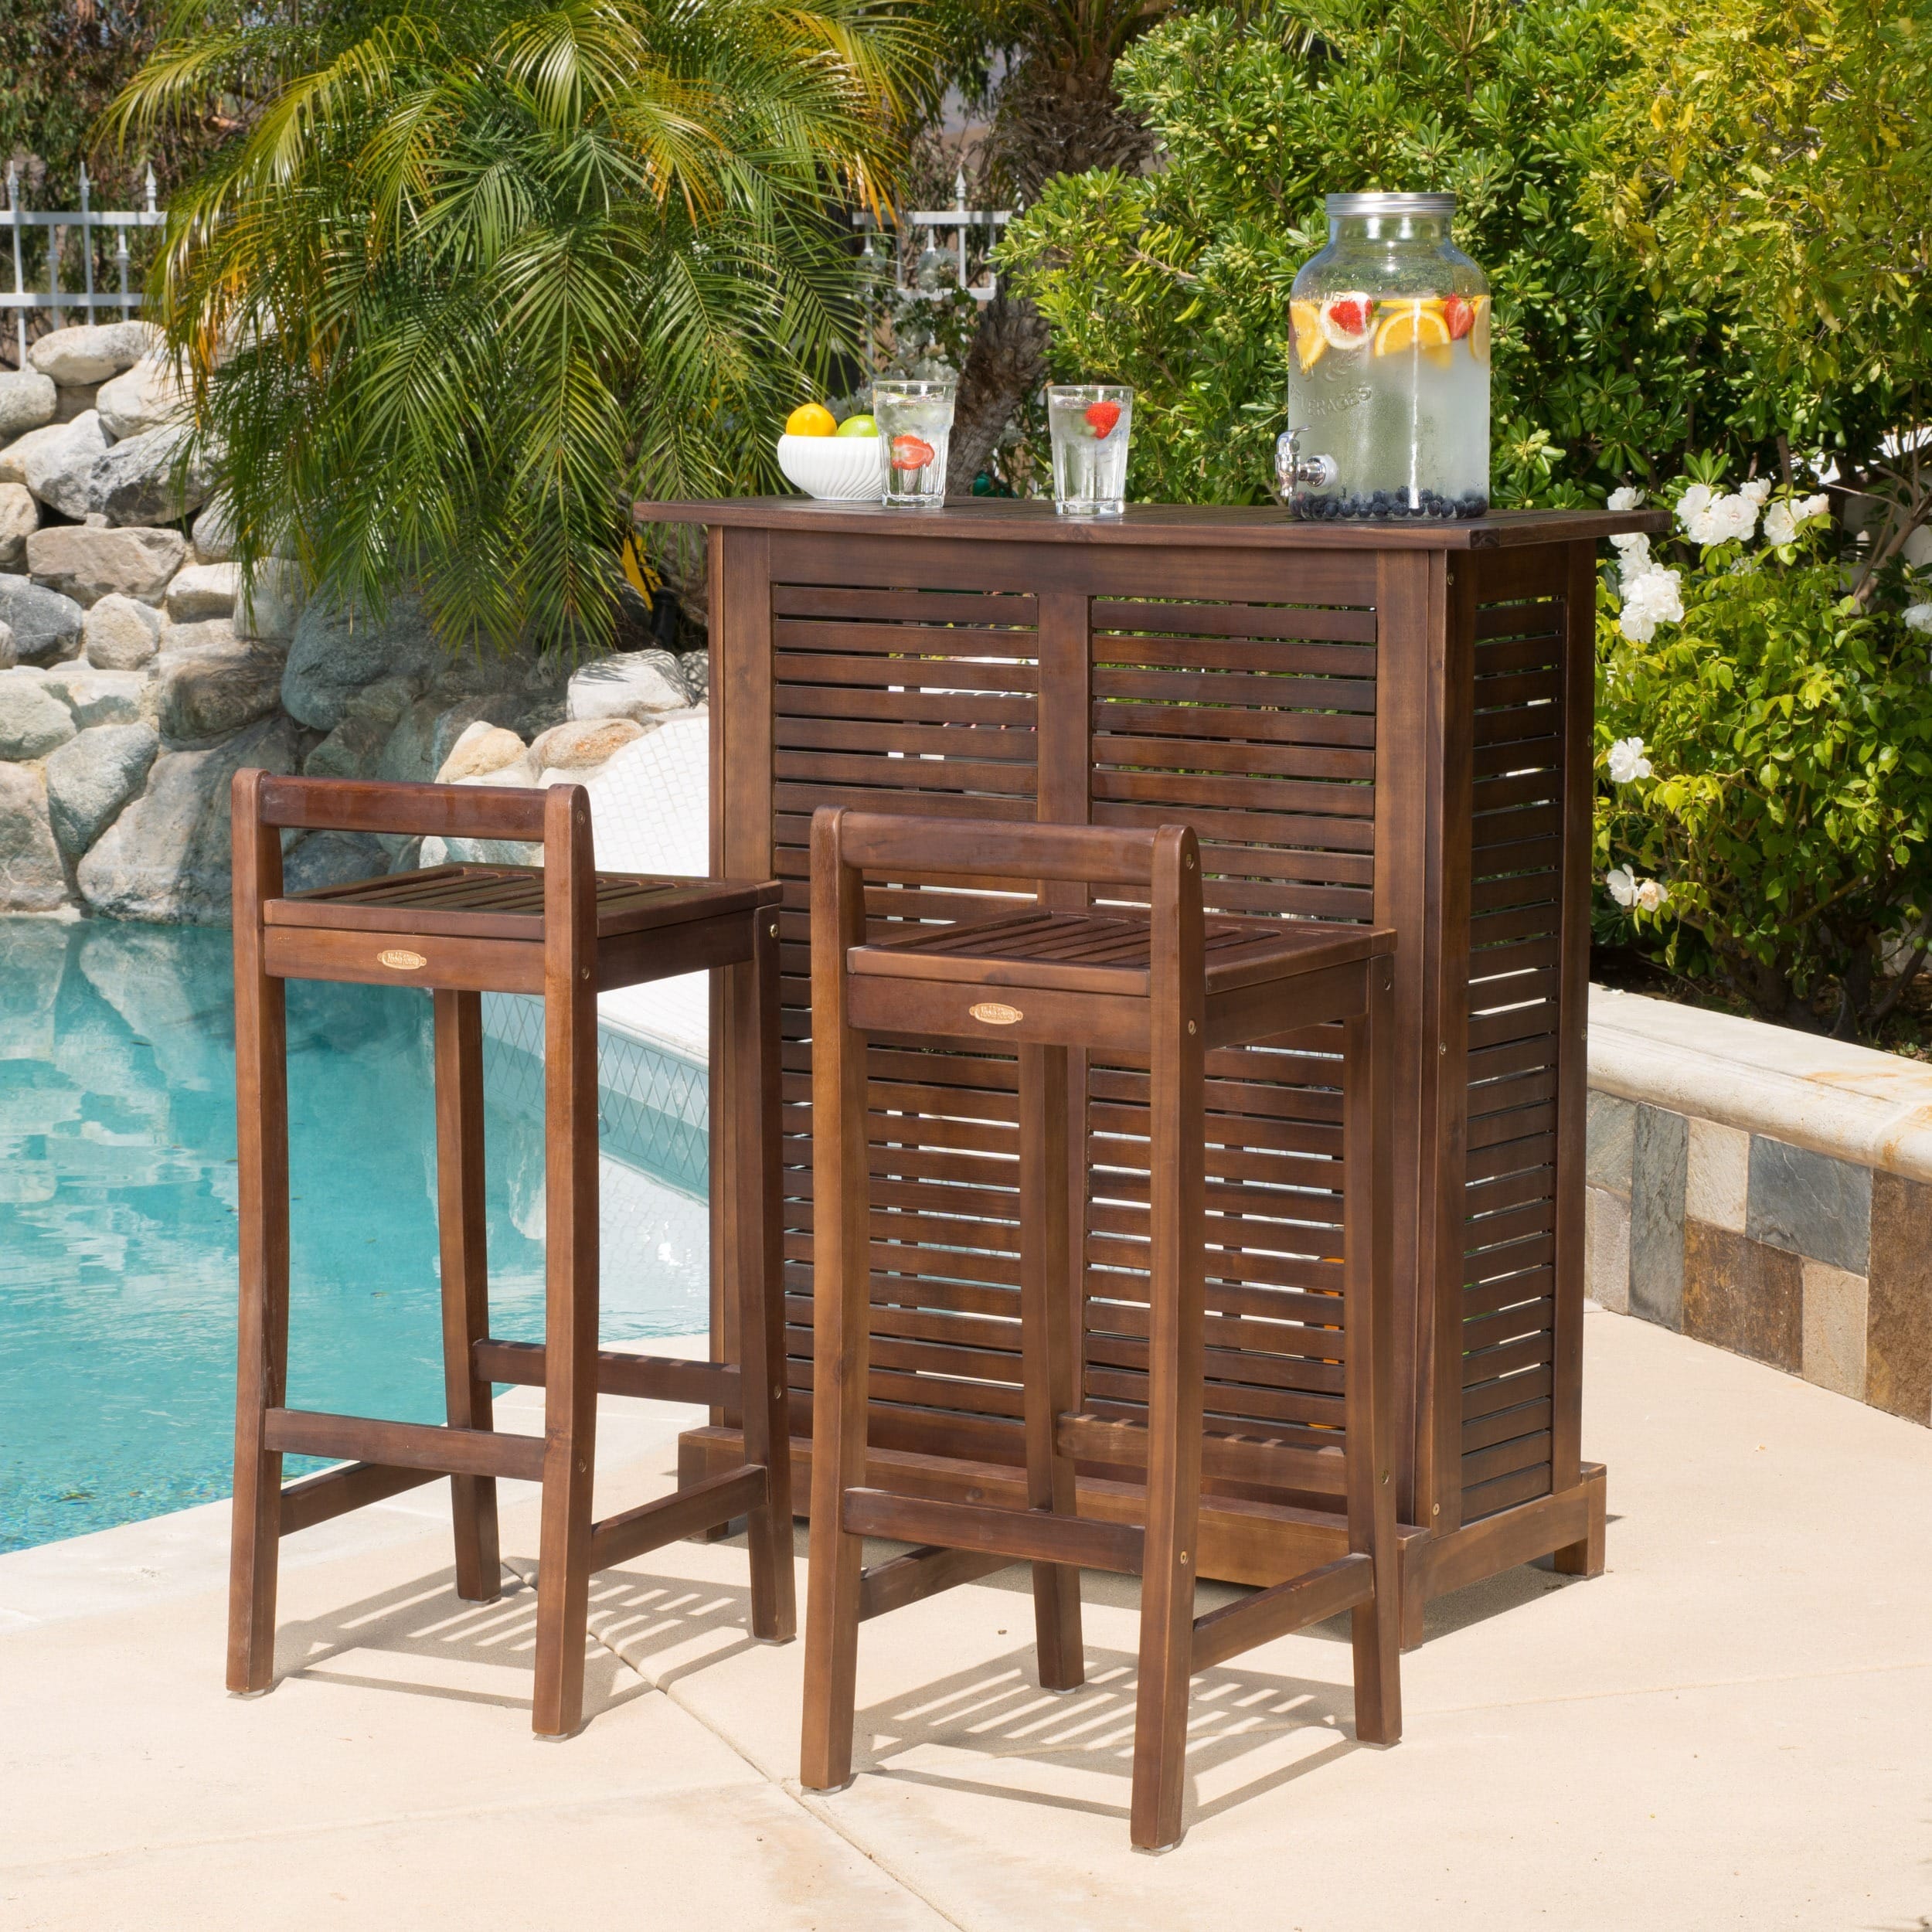 https://ak1.ostkcdn.com//images/products/9437347/Riviera-3-piece-Outdoor-Wood-Bar-Set-by-Christopher-Knight-Home-ccc0a396-cfaf-4905-9678-636b5fd058b2.jpg